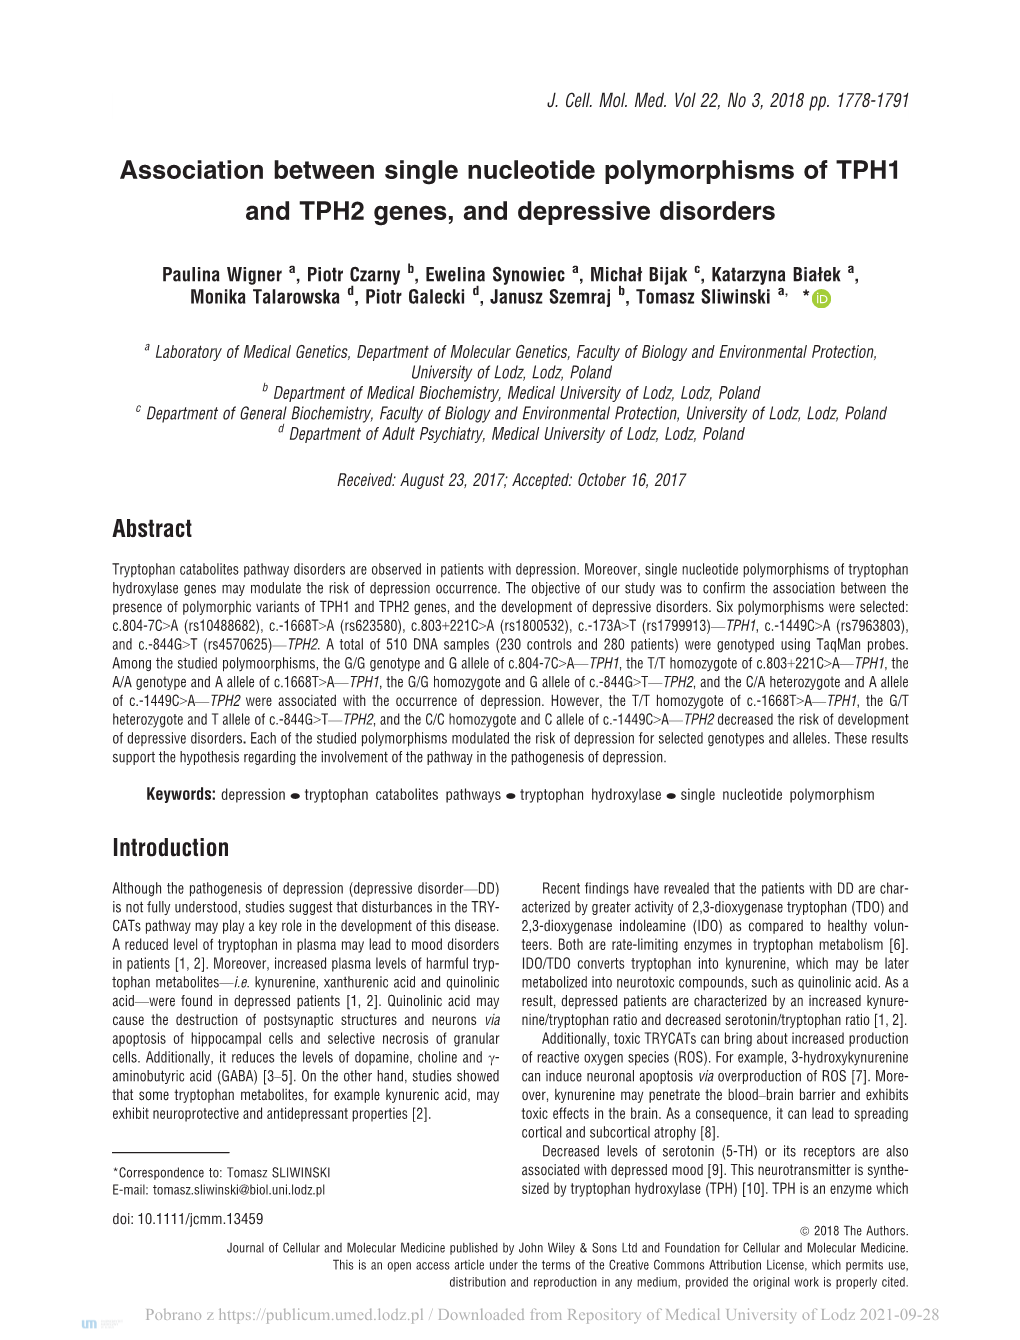 Association Between Single Nucleotide Polymorphisms of TPH1 and TPH2 Genes, and Depressive Disorders